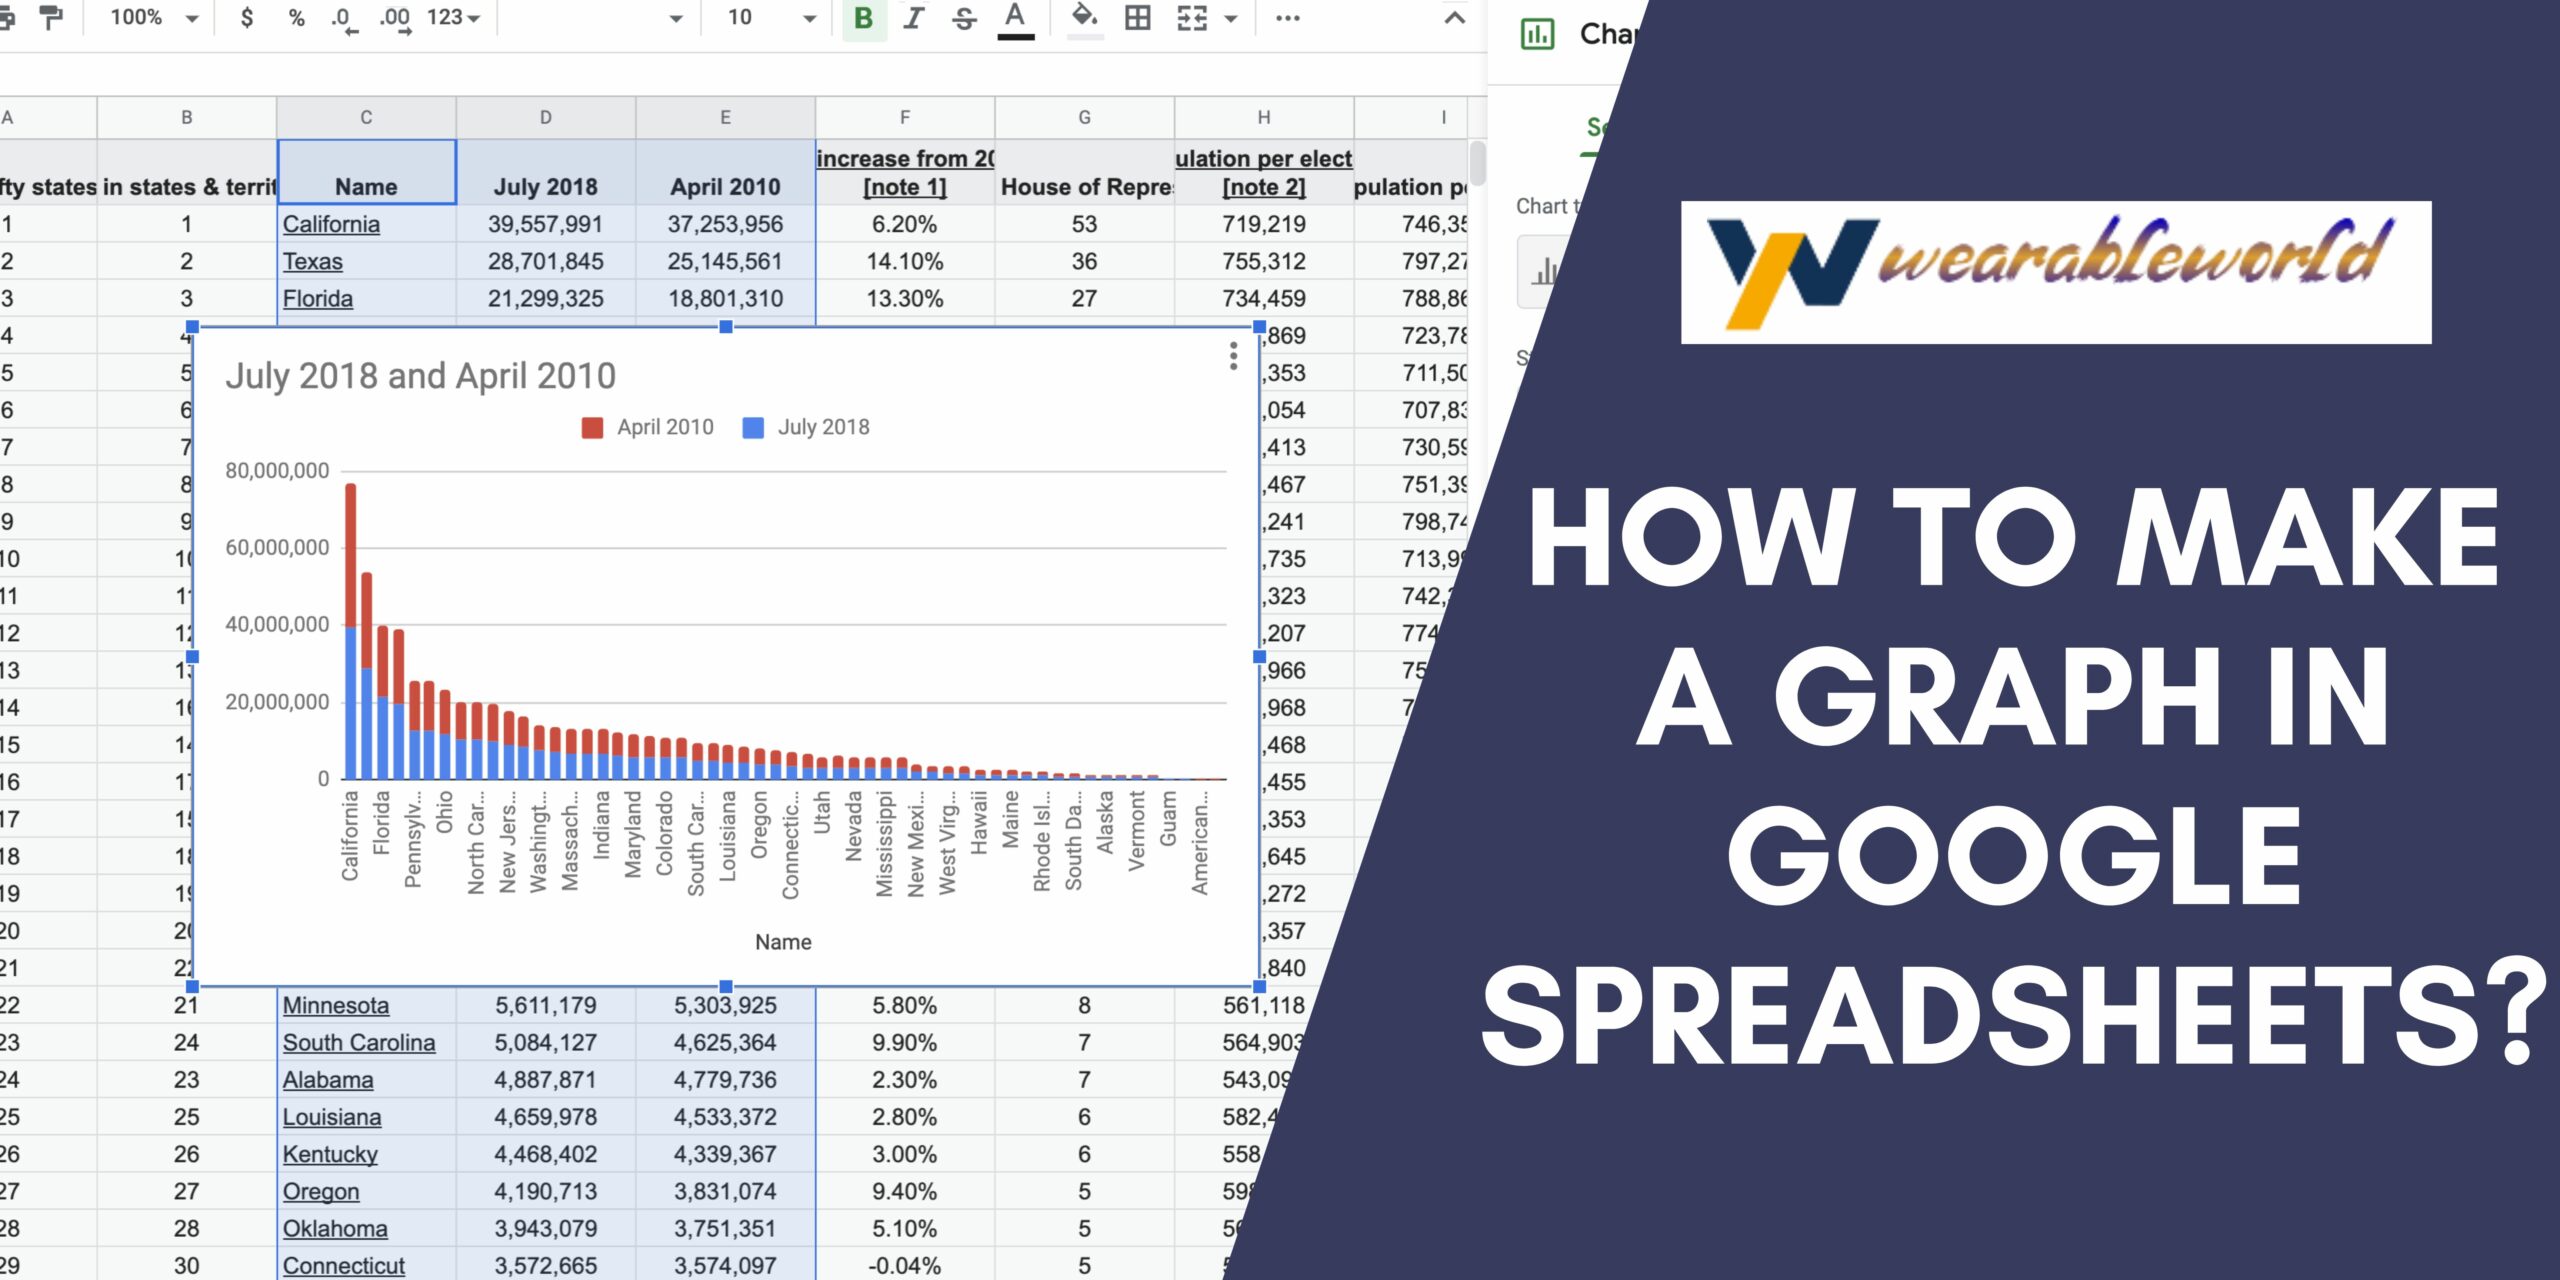 How to make a graph in Google Spreadsheets